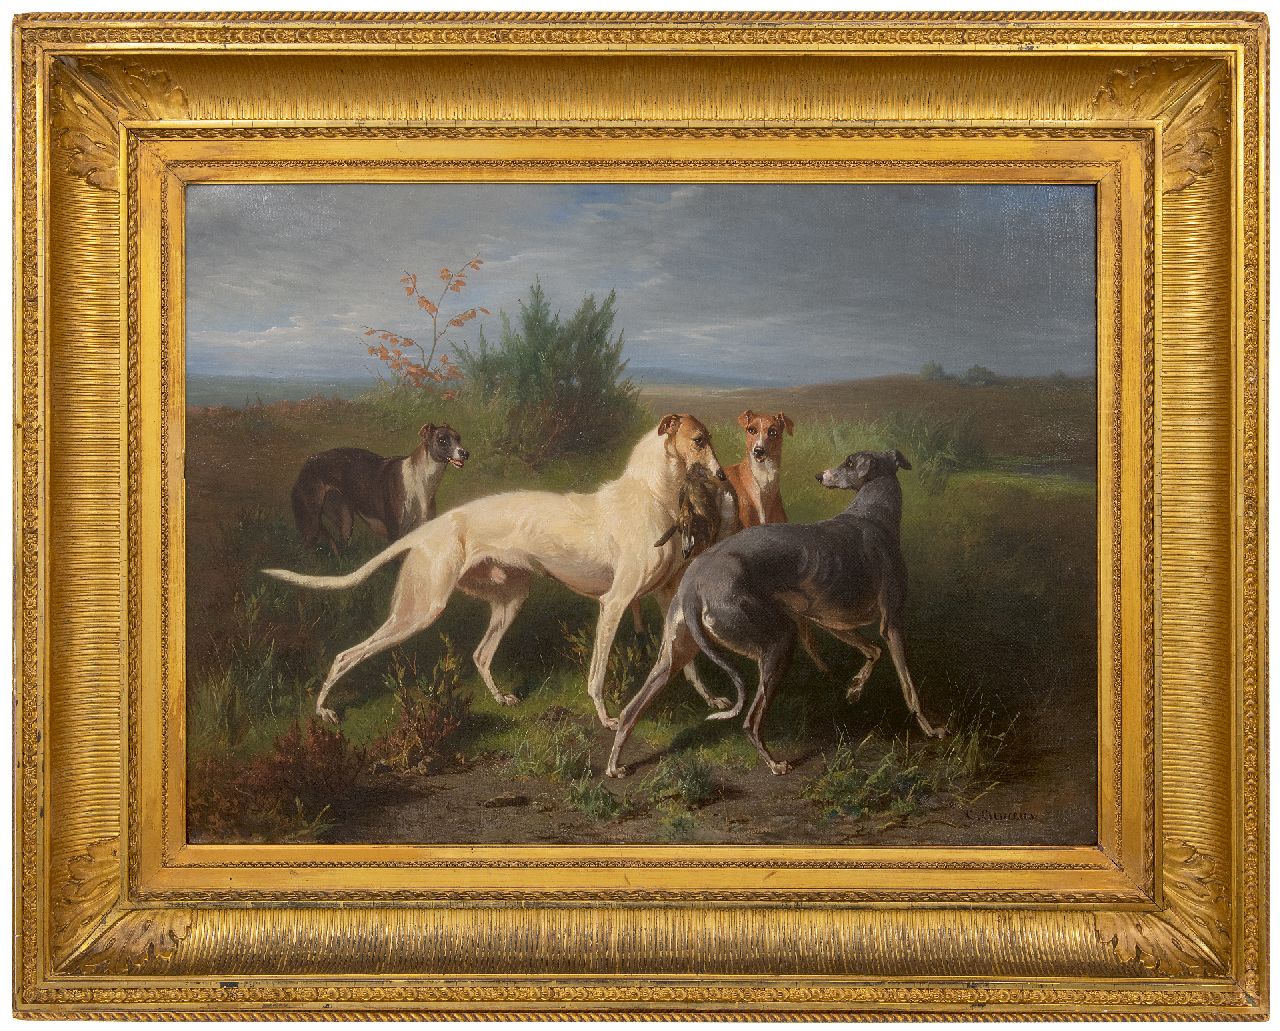 Cunaeus C.  | Conradijn Cunaeus | Paintings offered for sale | Hunting dogs with a prey, oil on canvas 65.2 x 90.2 cm, signed l.r.